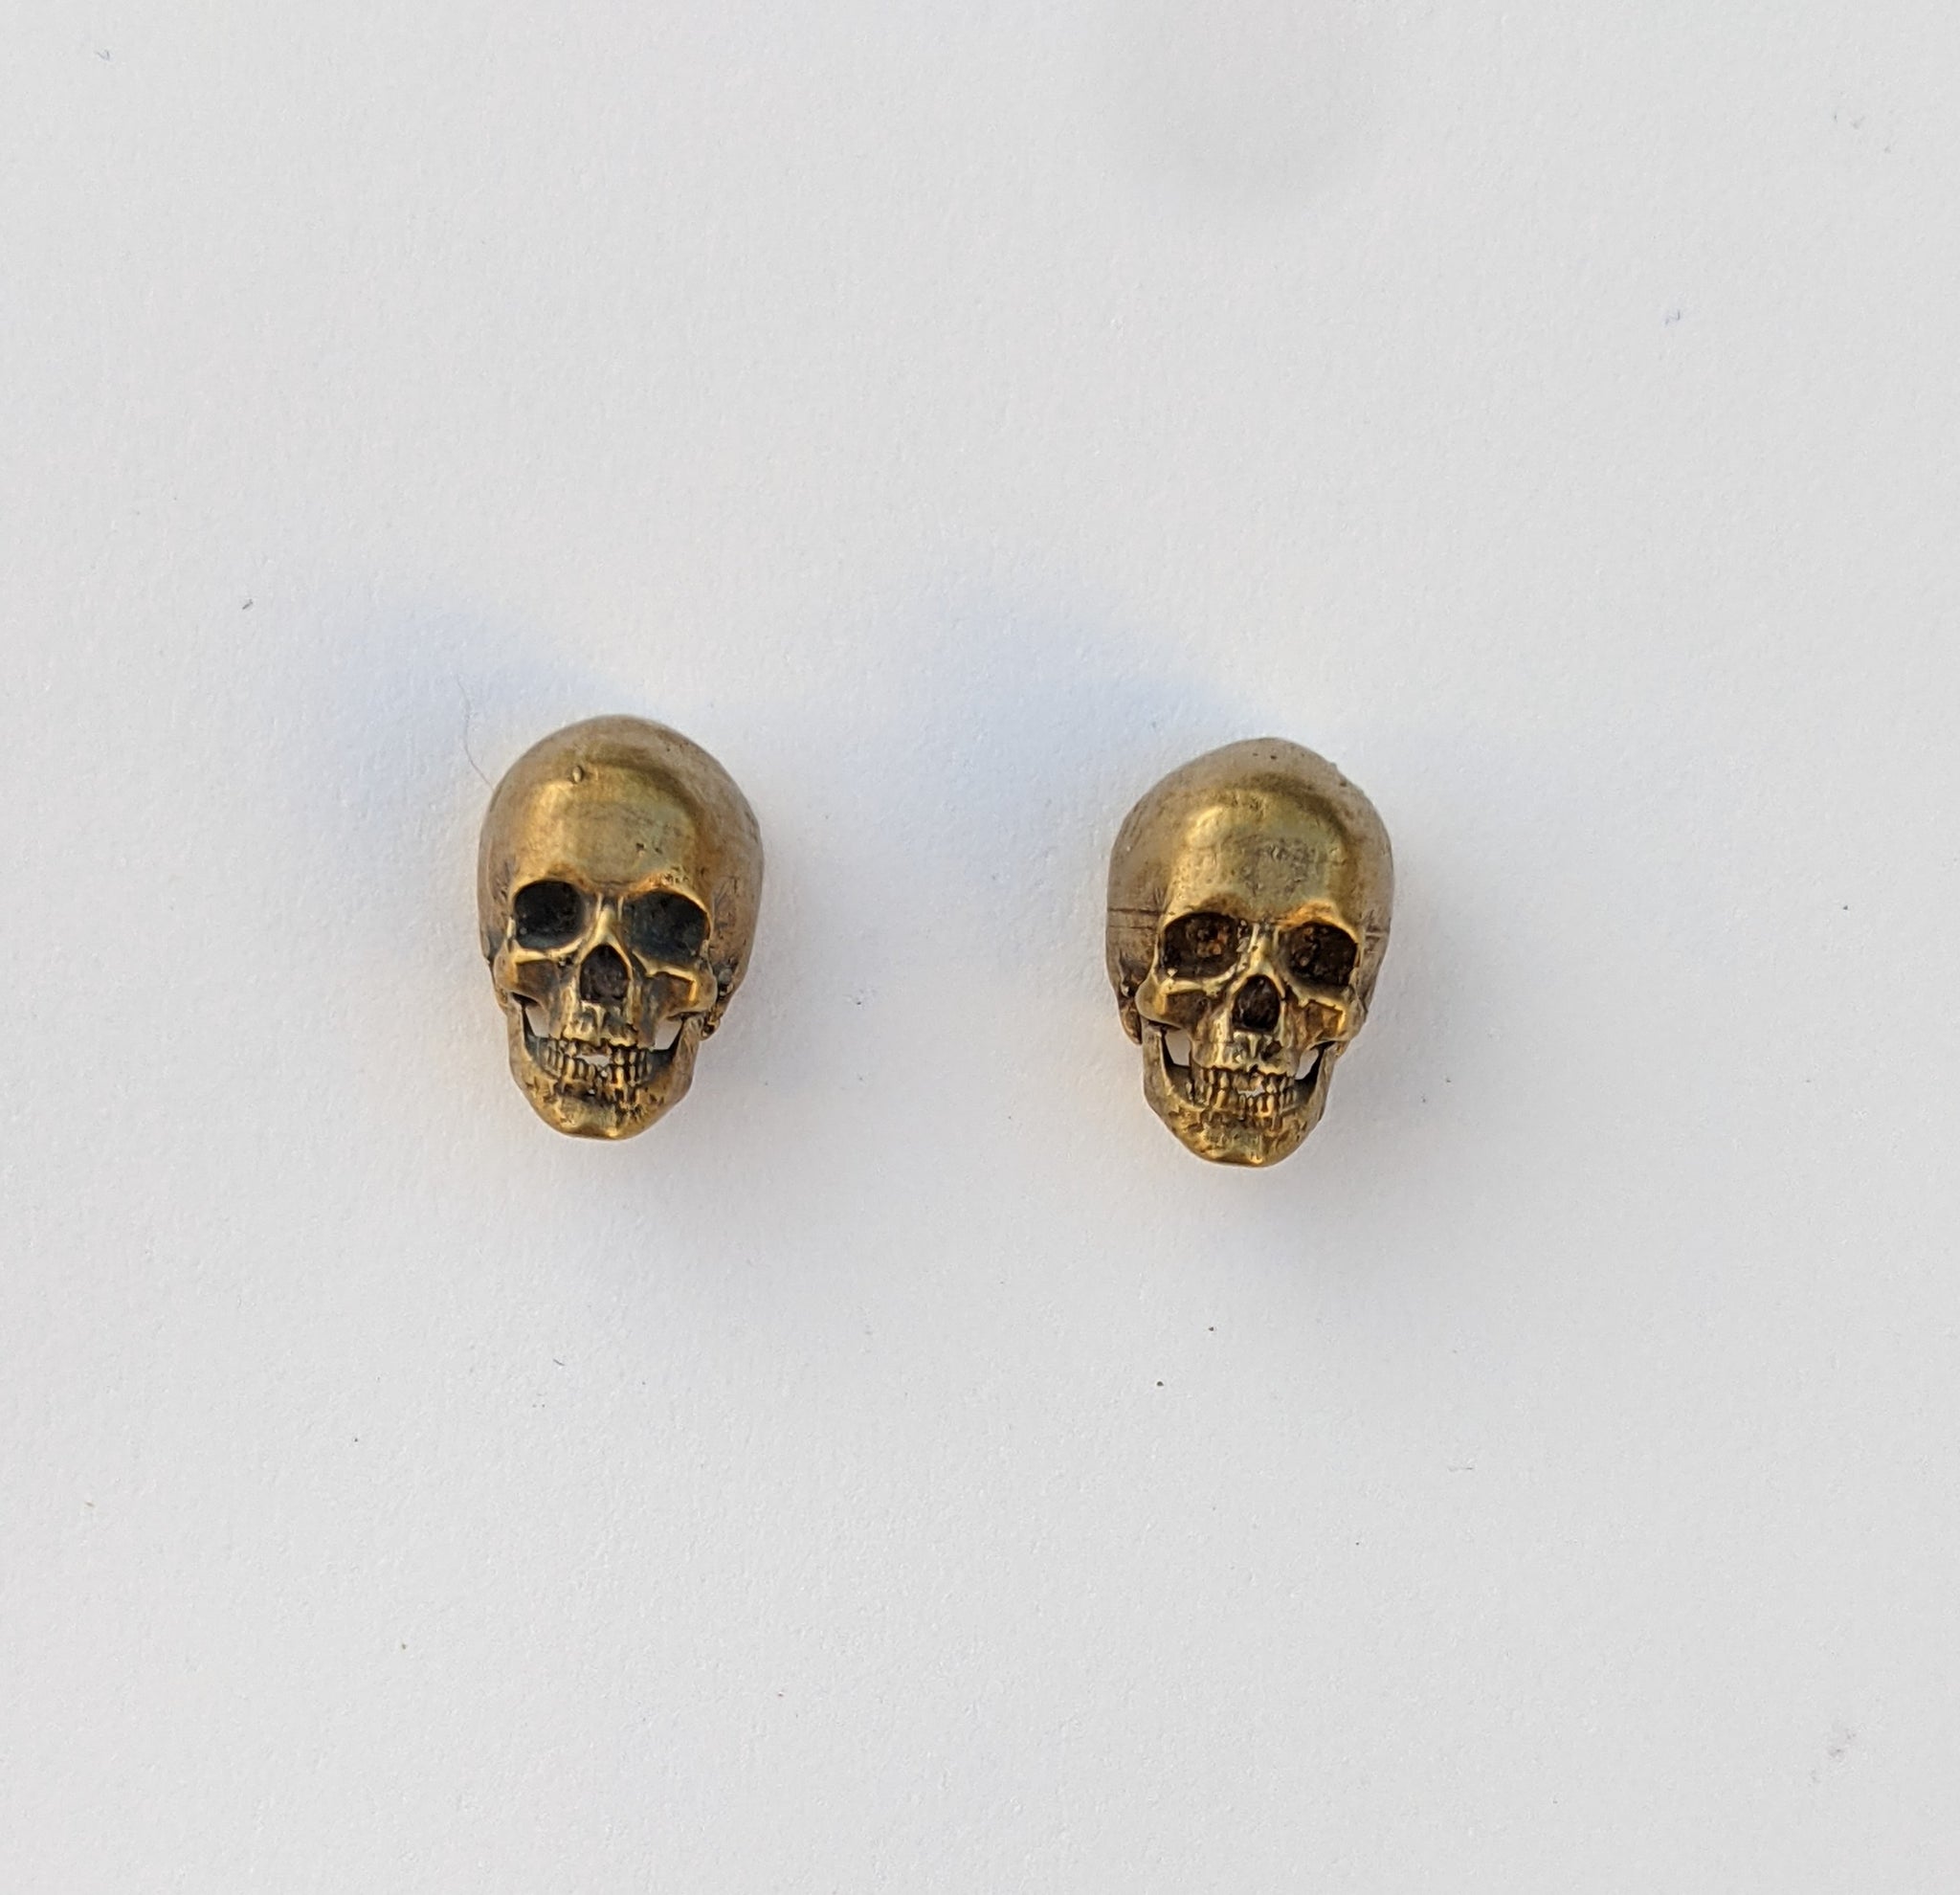 A pair of matching skull earrings with detailed eyes, nose, jaws, and teeth in yellow bronze.